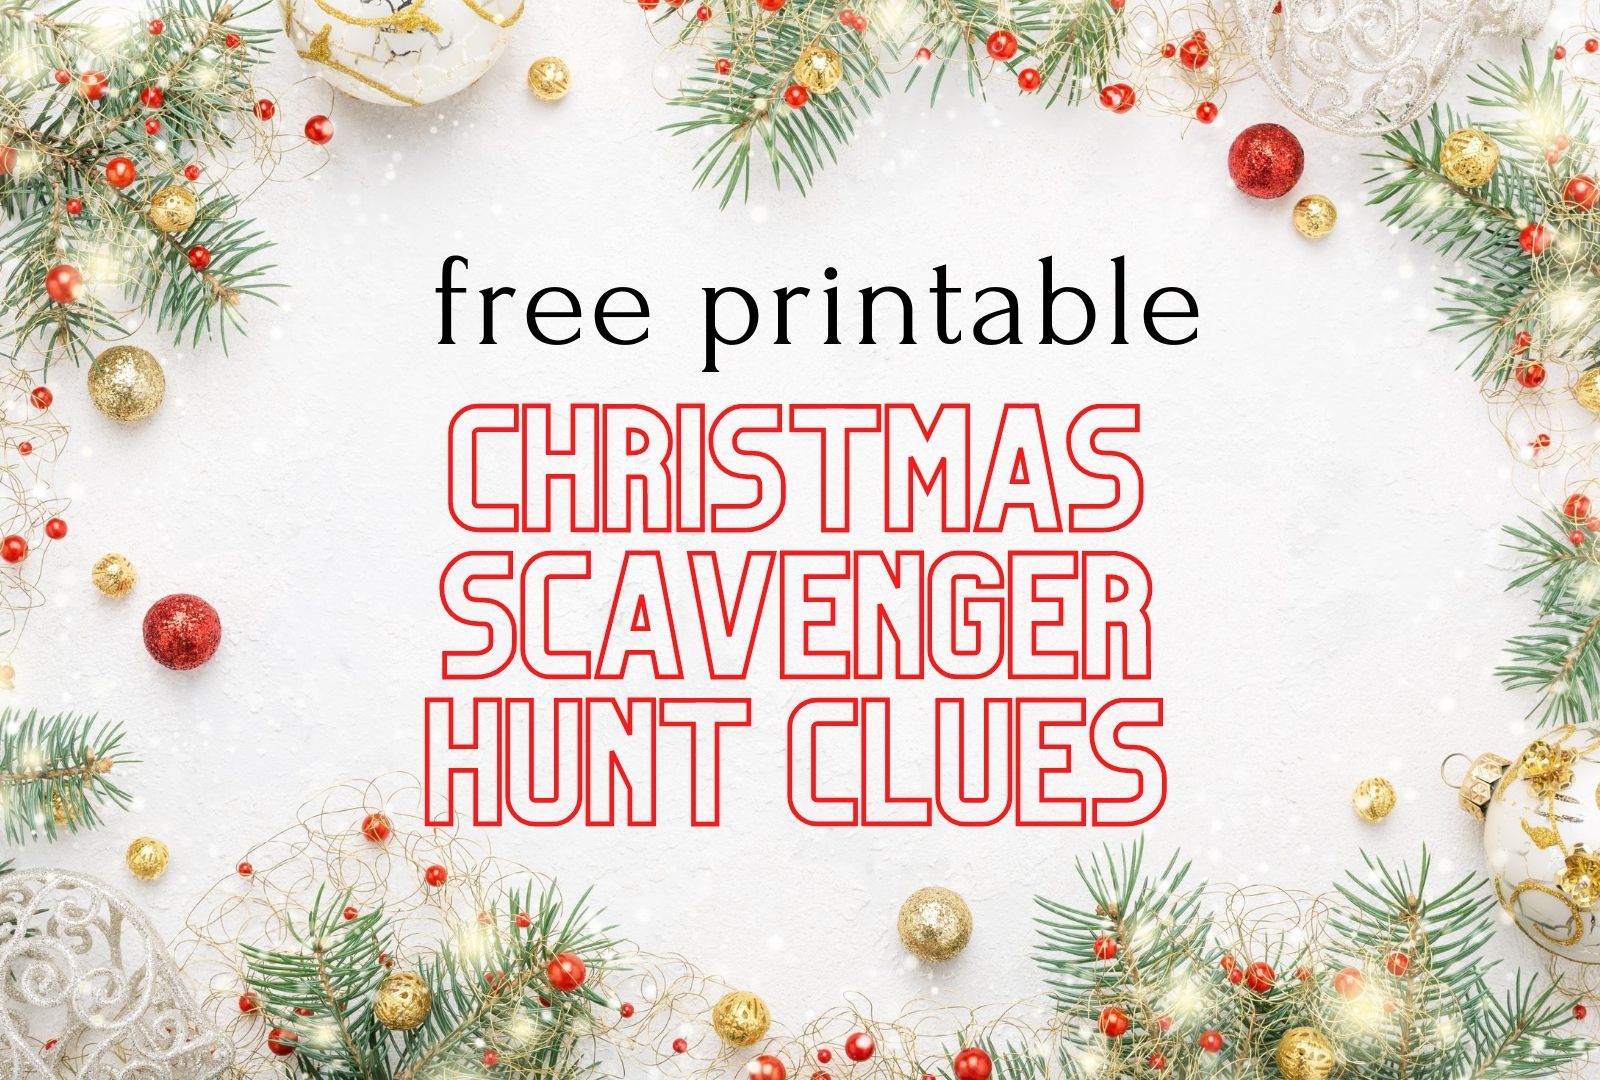 Christmas Scavenger Hunt Clues: 6 Free Riddles that Rhyme!